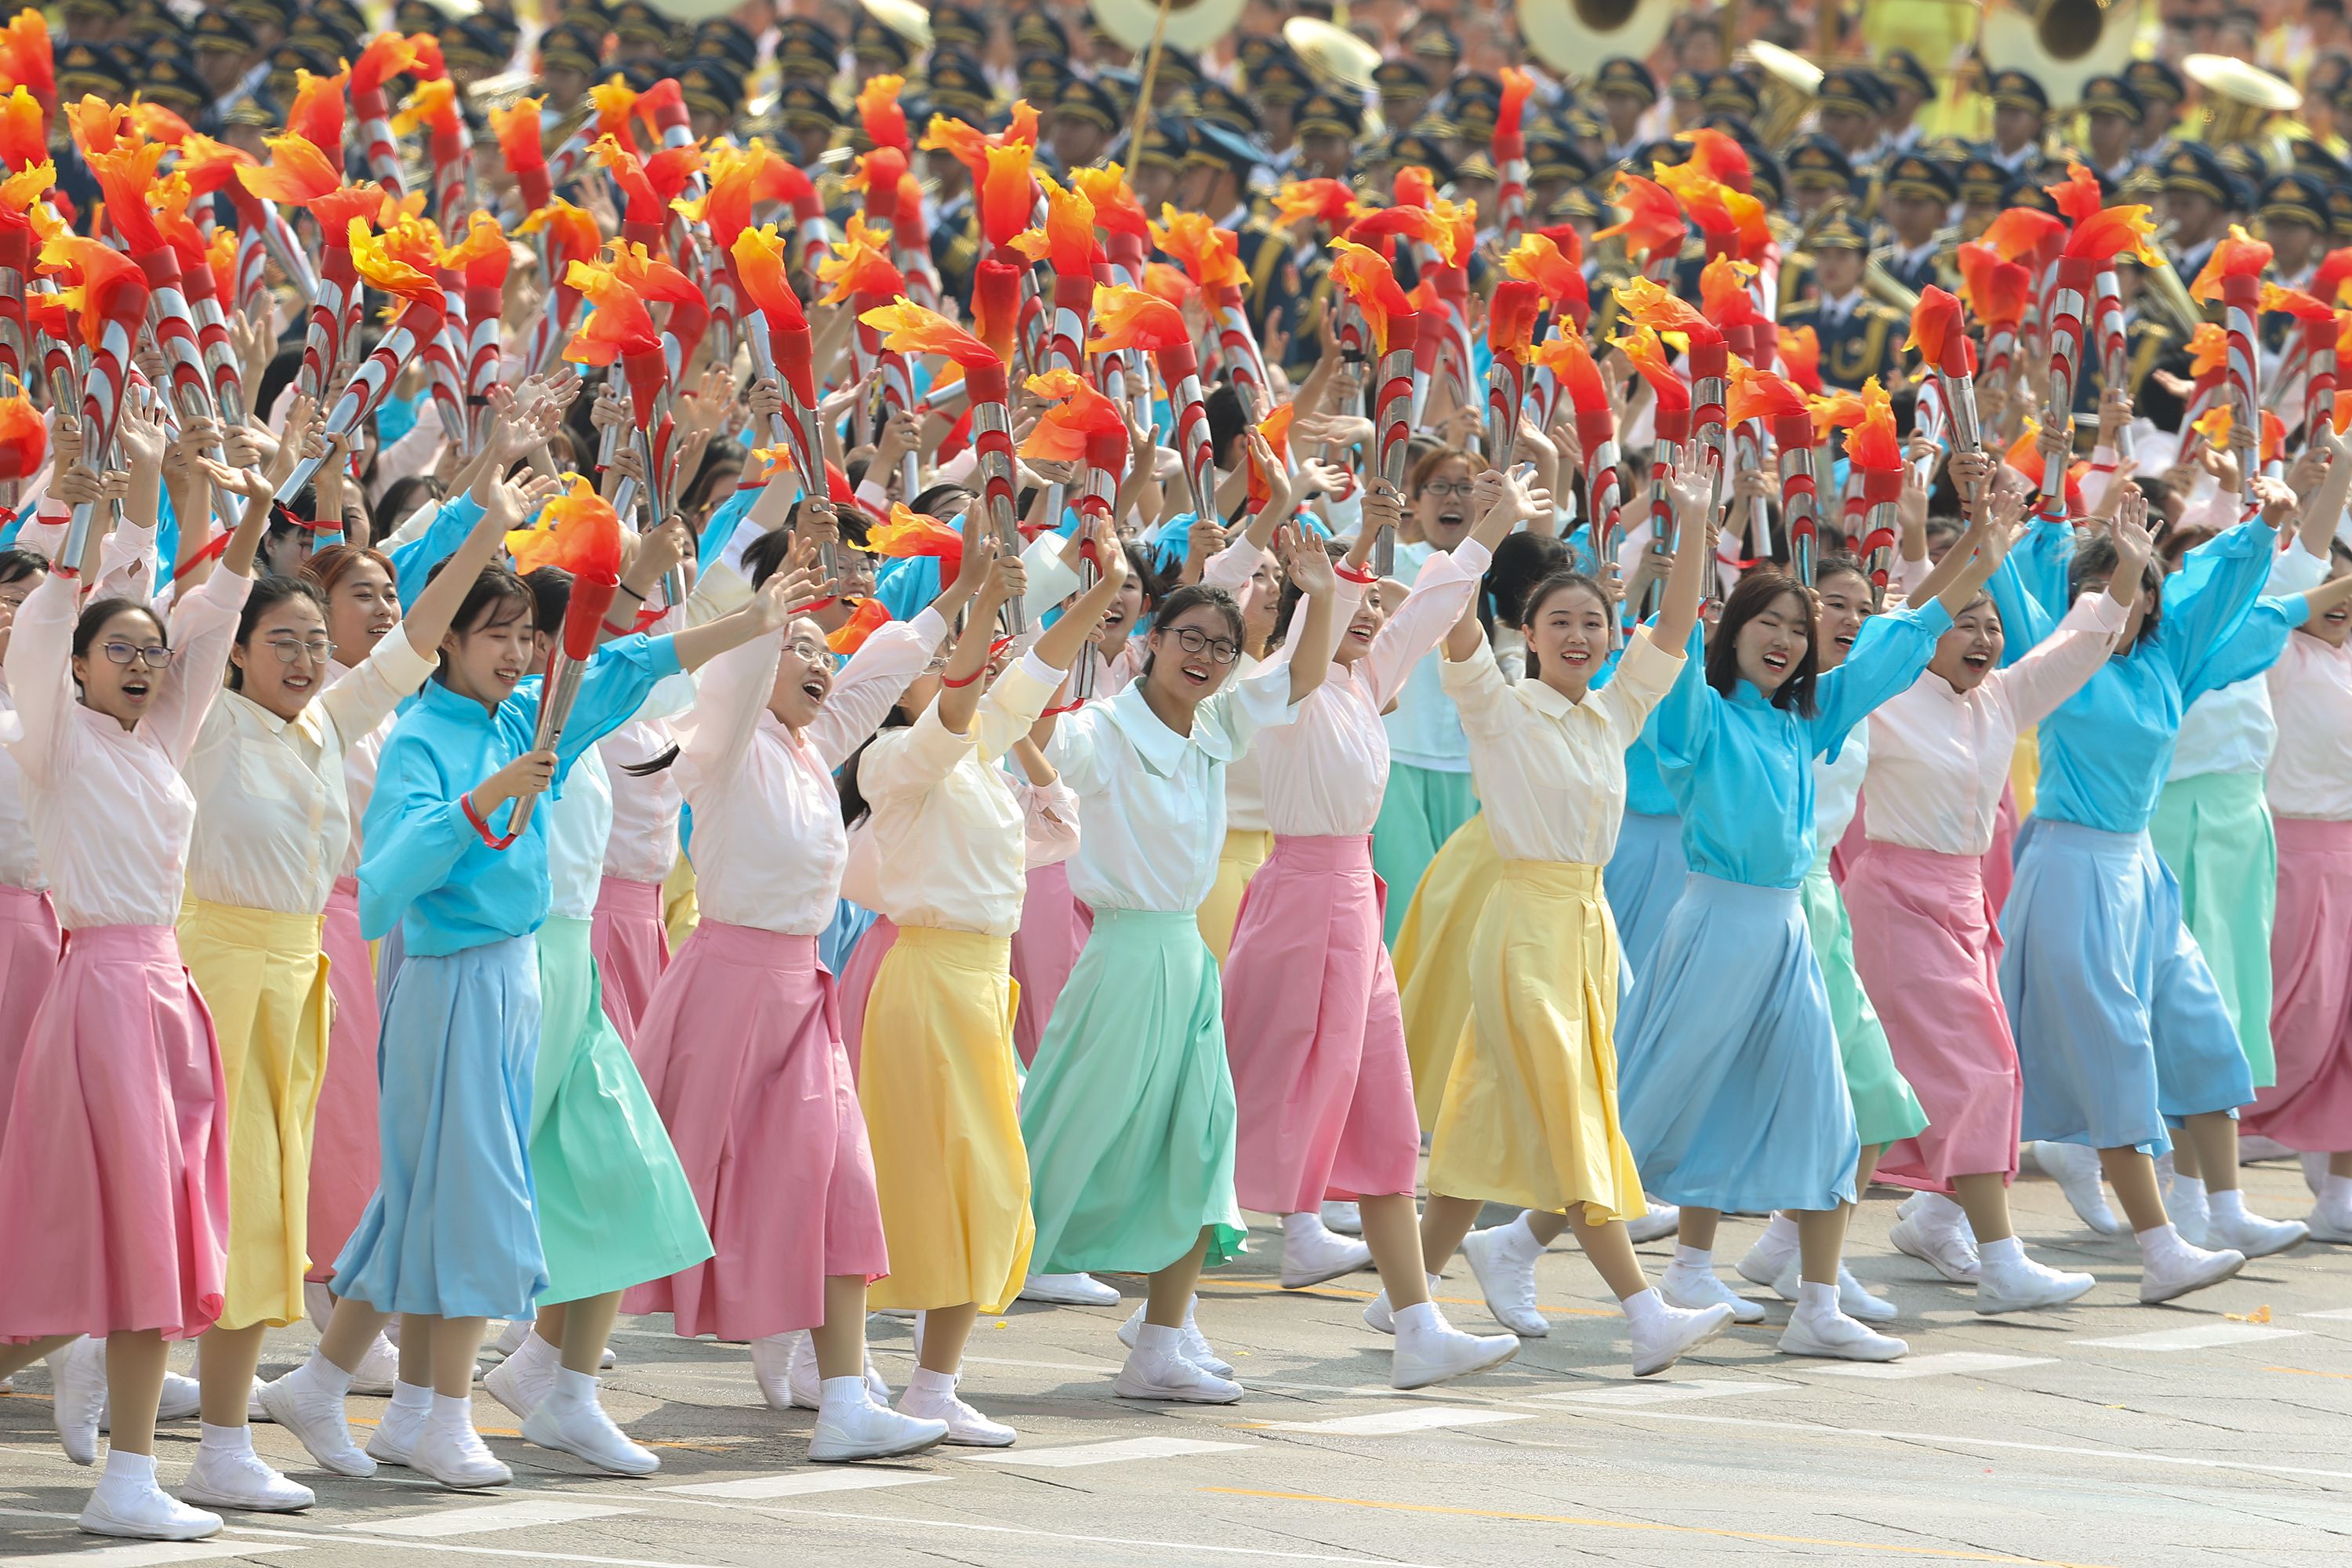  Performers walk and dance during the parade for the 70th anniversary of the establishment of the People's Republic of China on October 01